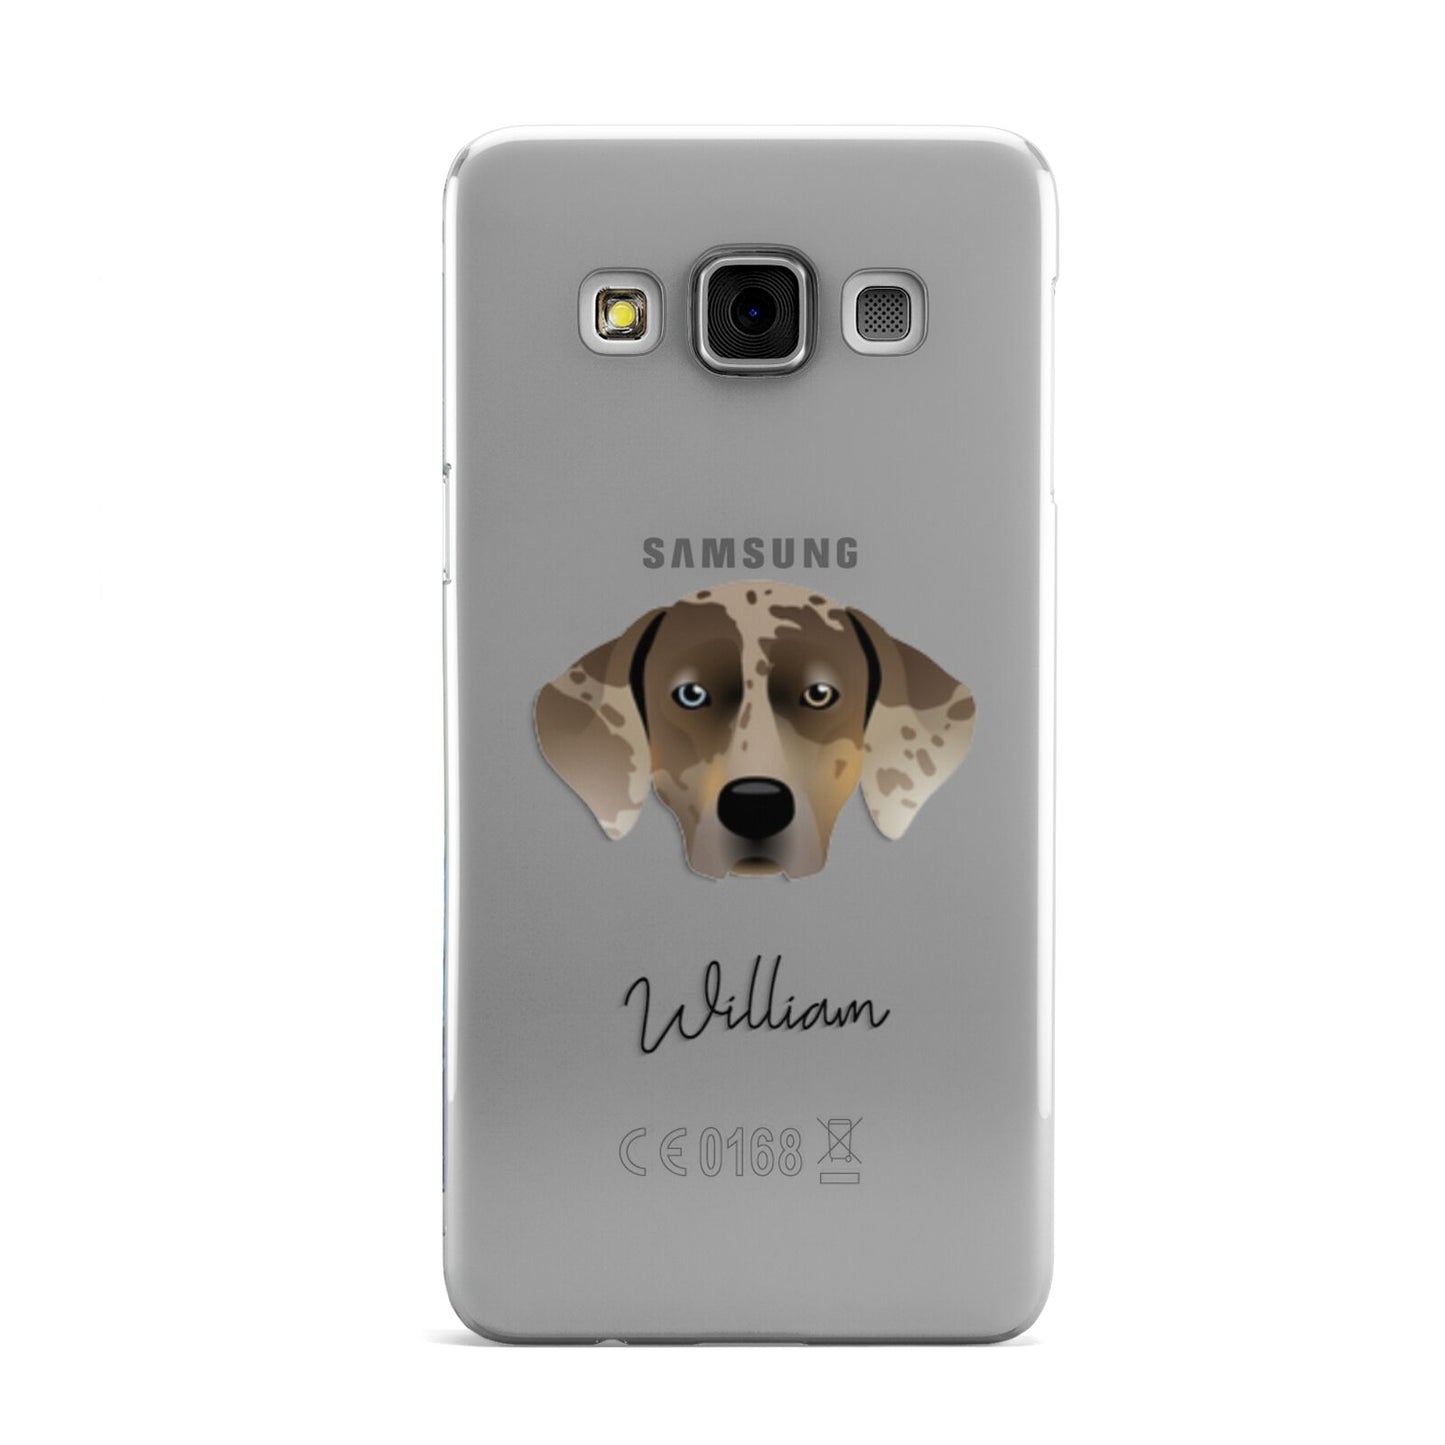 Catahoula Leopard Dog Personalised Samsung Galaxy A3 Case